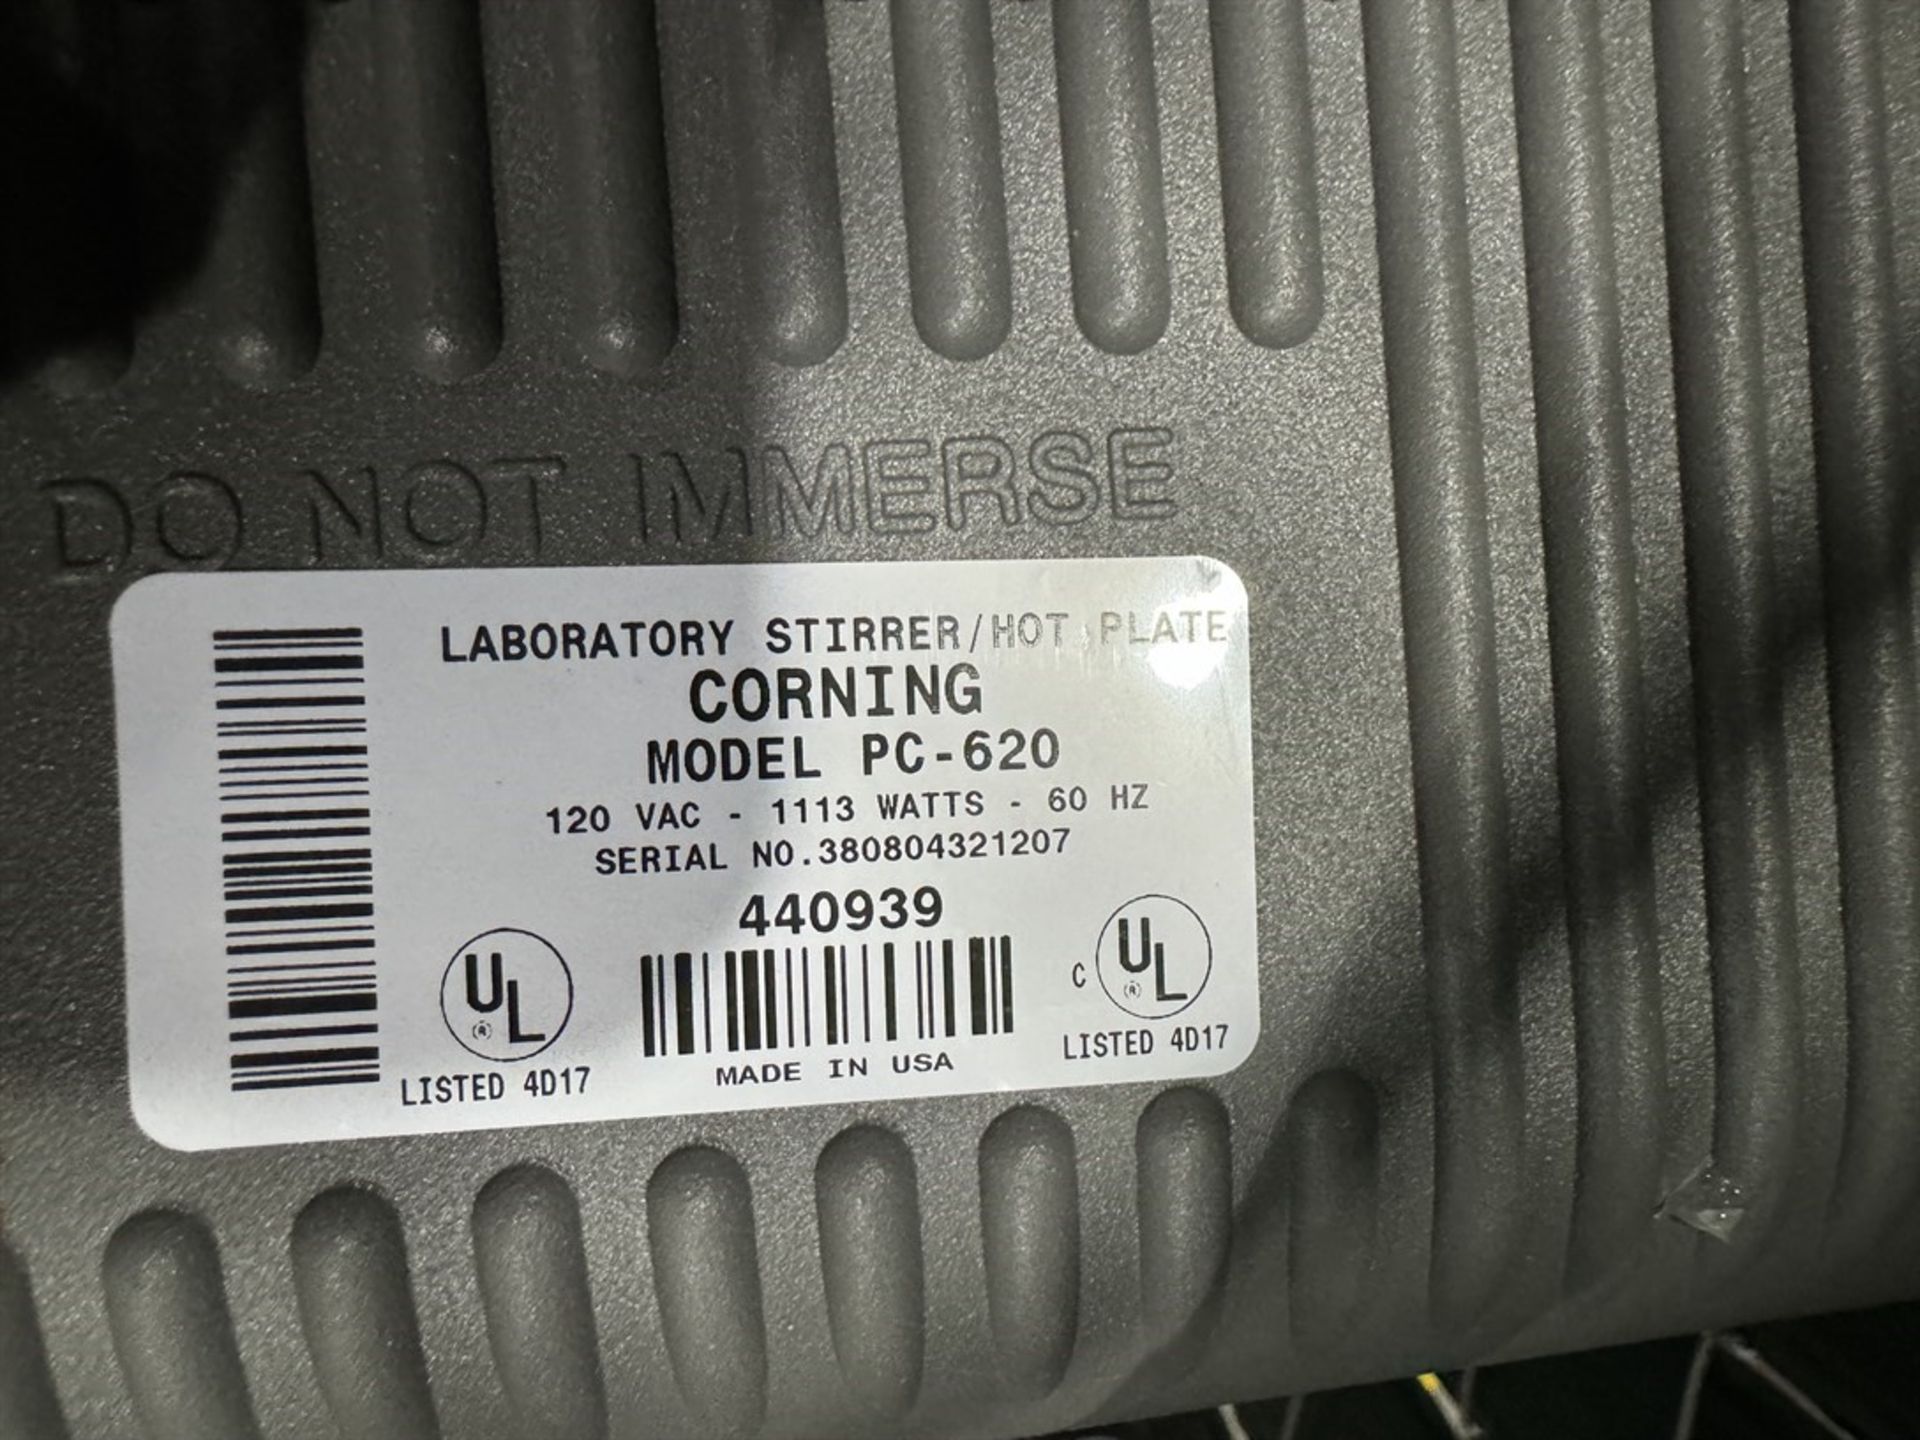 CORNING PC-620 Stirrer/Hot Plate, s/n 380804321207 - Image 3 of 3